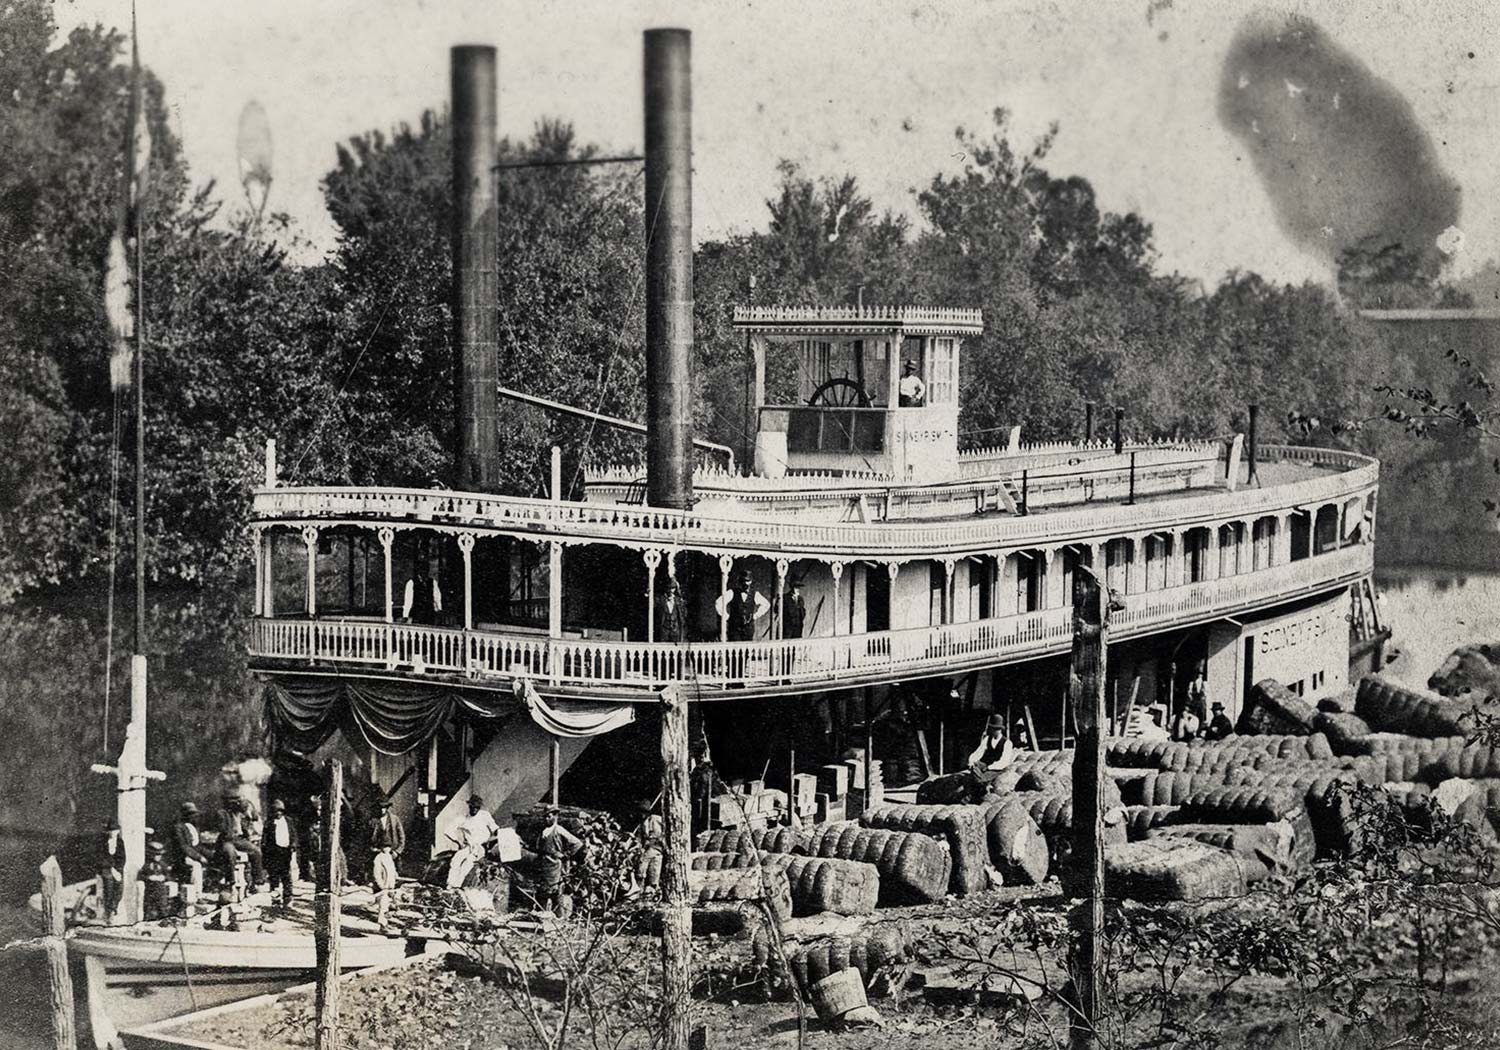 The steamboat Harriett being loaded with large bales of cargo on the Alabama River.